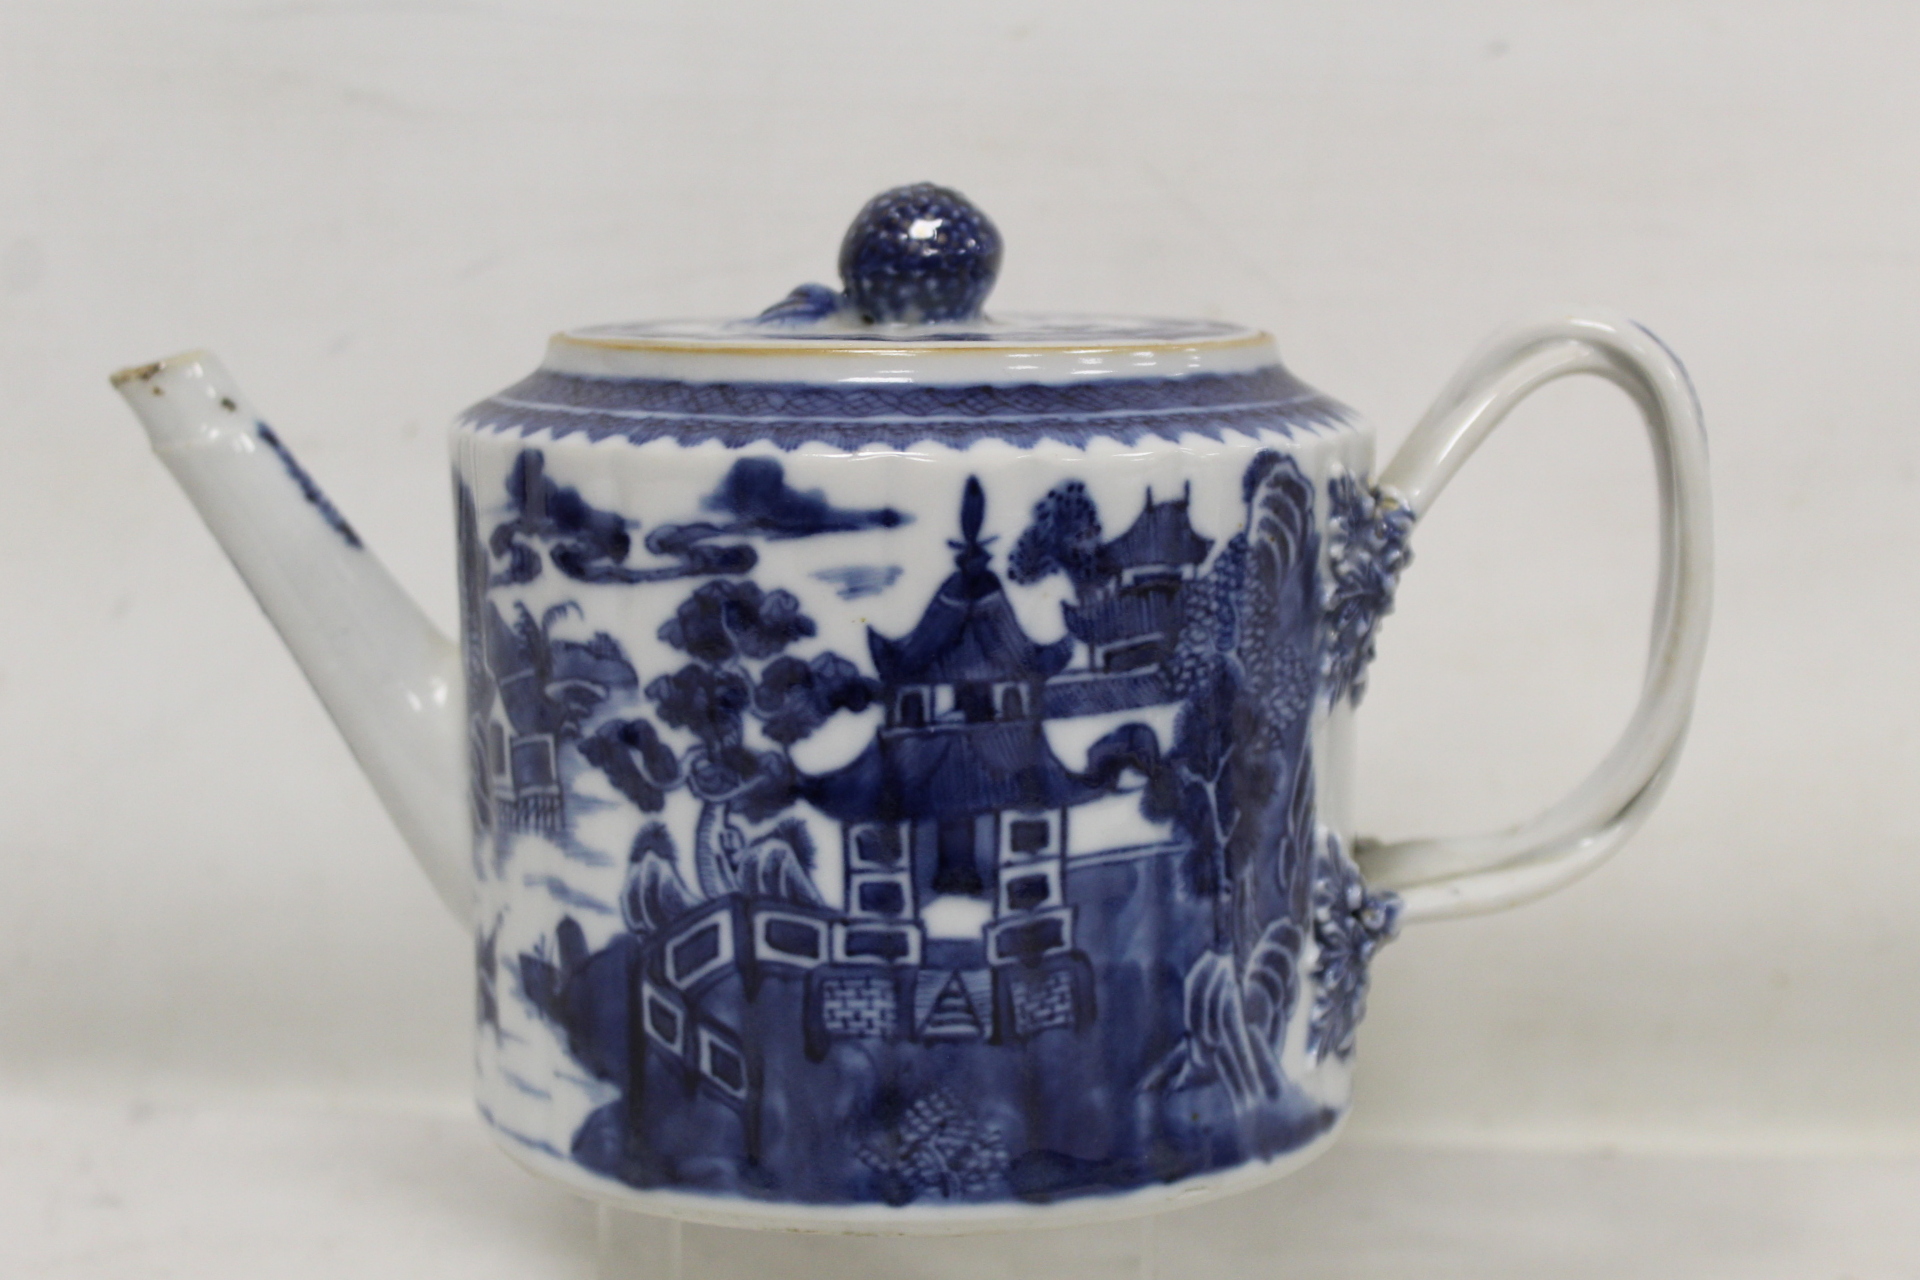 18th century Chinese blue and white porcelain teapot of reeded cylindrical form with entwined - Image 2 of 21